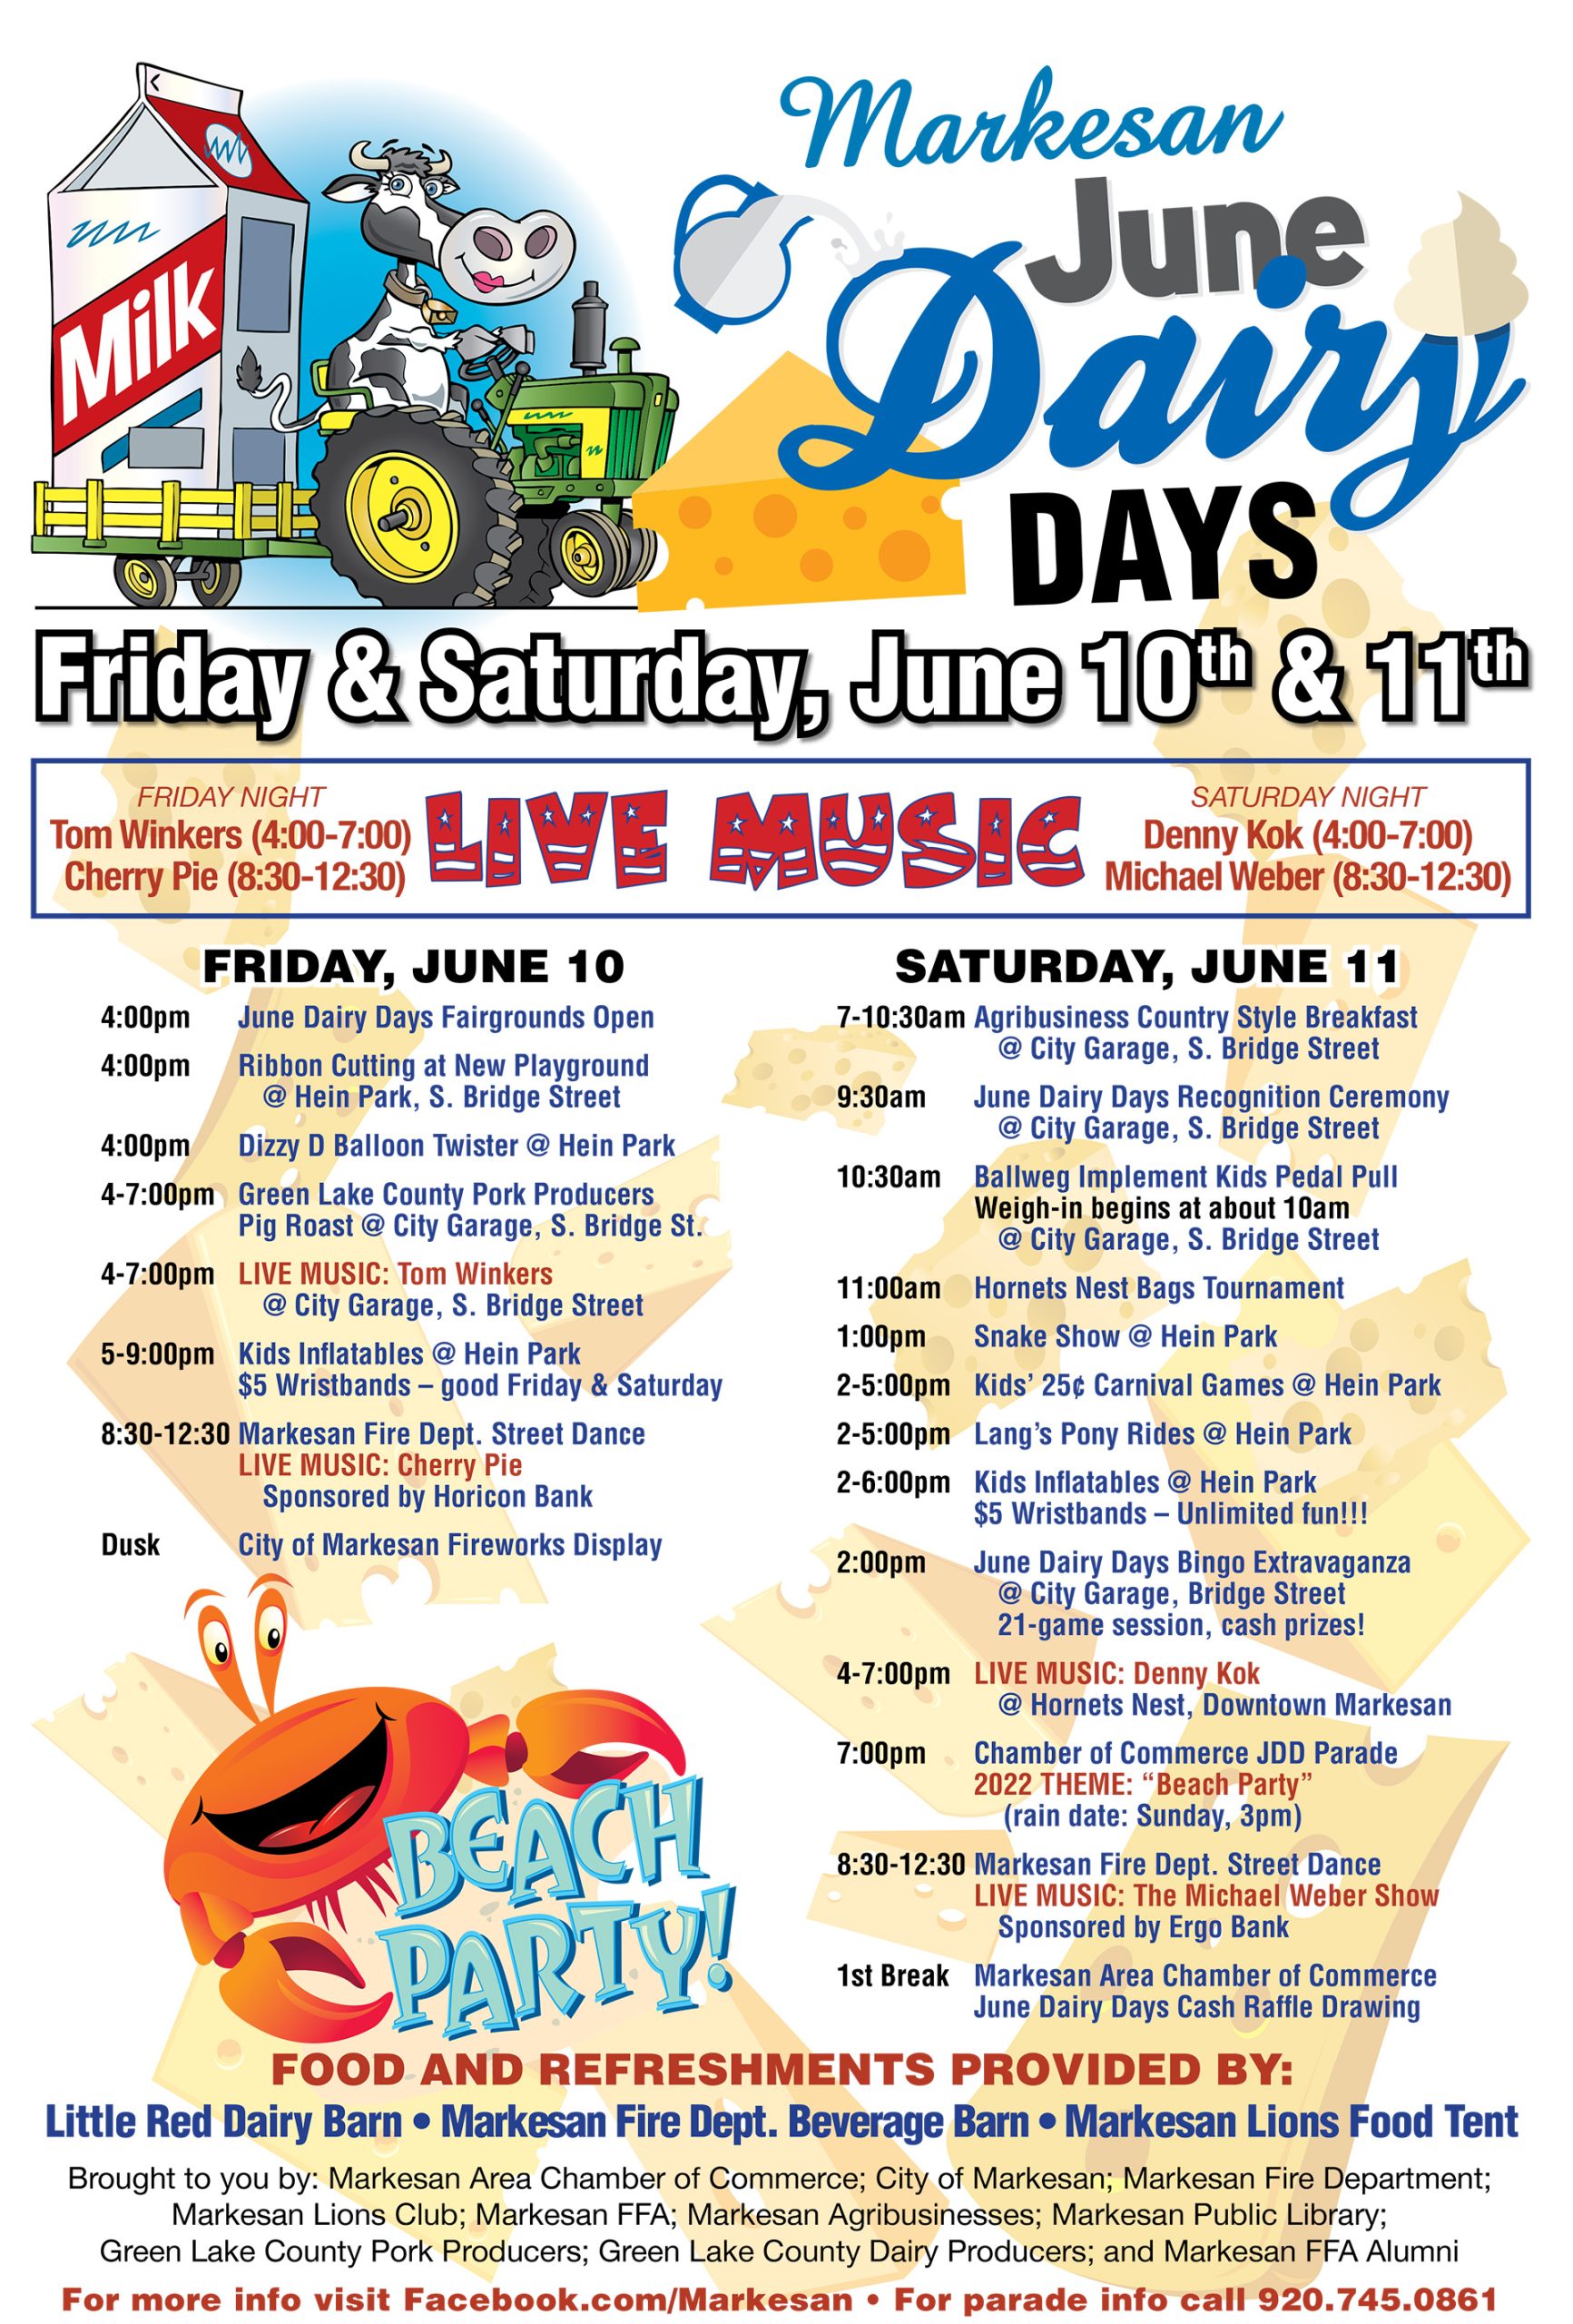 June Dairy Days Markesan Area Chamber of Commerce